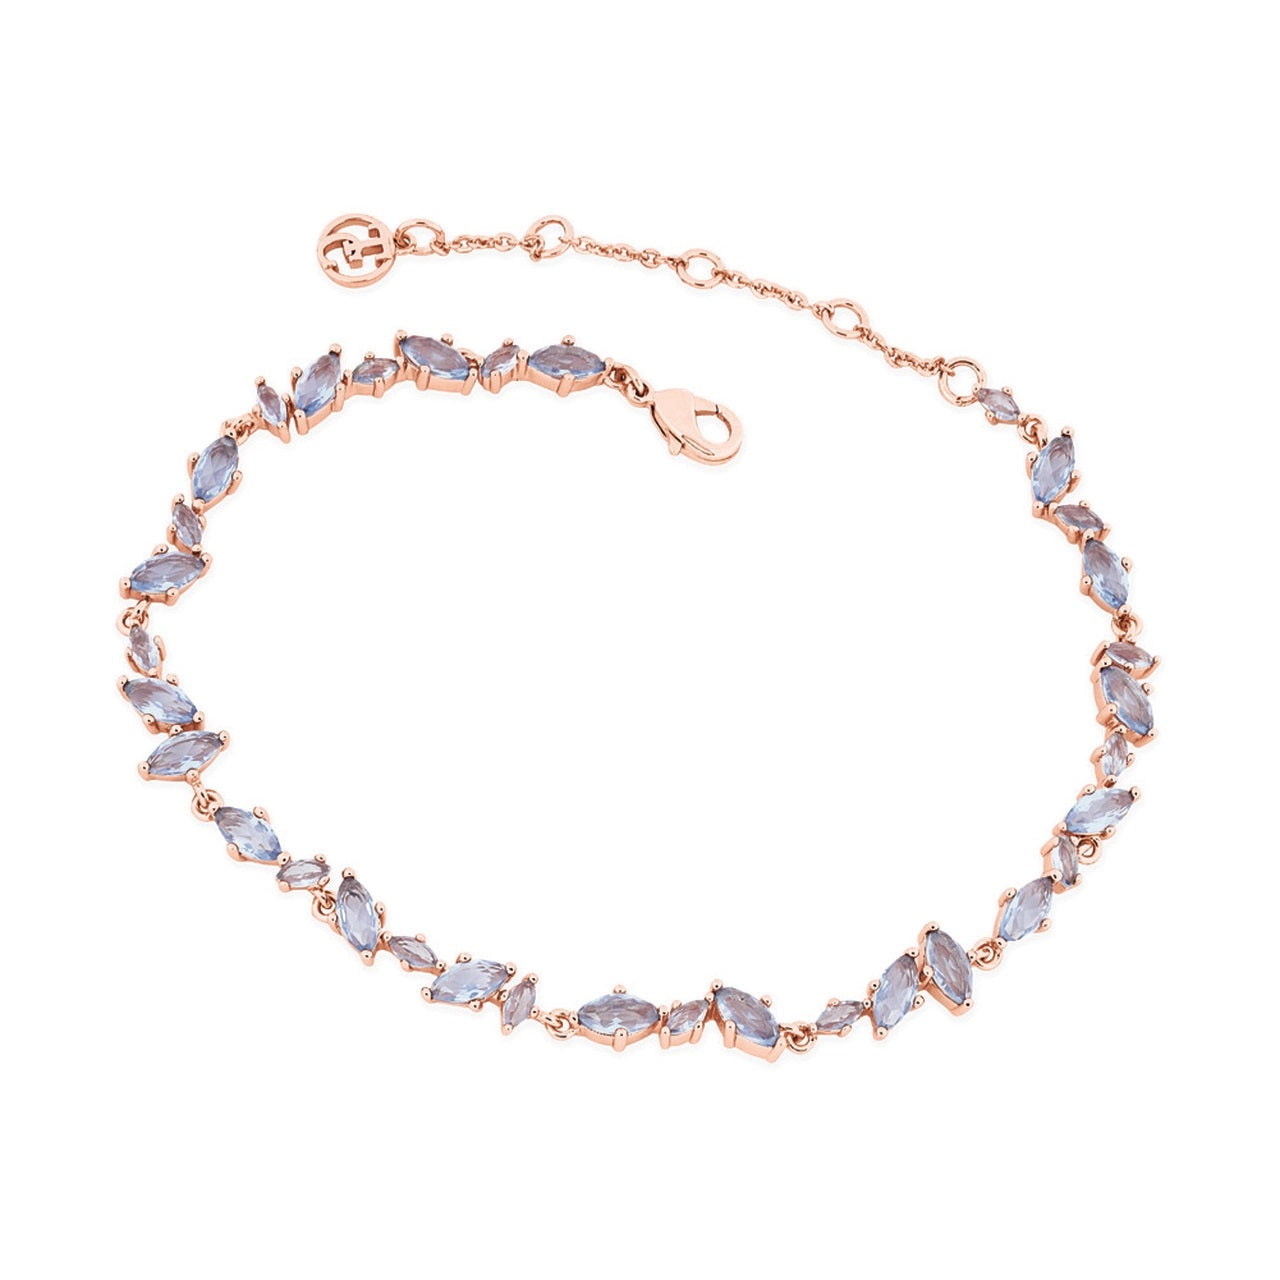 Tipperary Crystal Maureen O’Hara Marquise Blue Rose Gold Bracelet This versatile bracelet can be worn casually or with additional pieces from this collection to create a more dramatic look. Fashioned in Rose gold this bracelet is beautiful paired with its matching earrings. It secures safely with a lobster claw clasp and has the convenience of an extension chain.